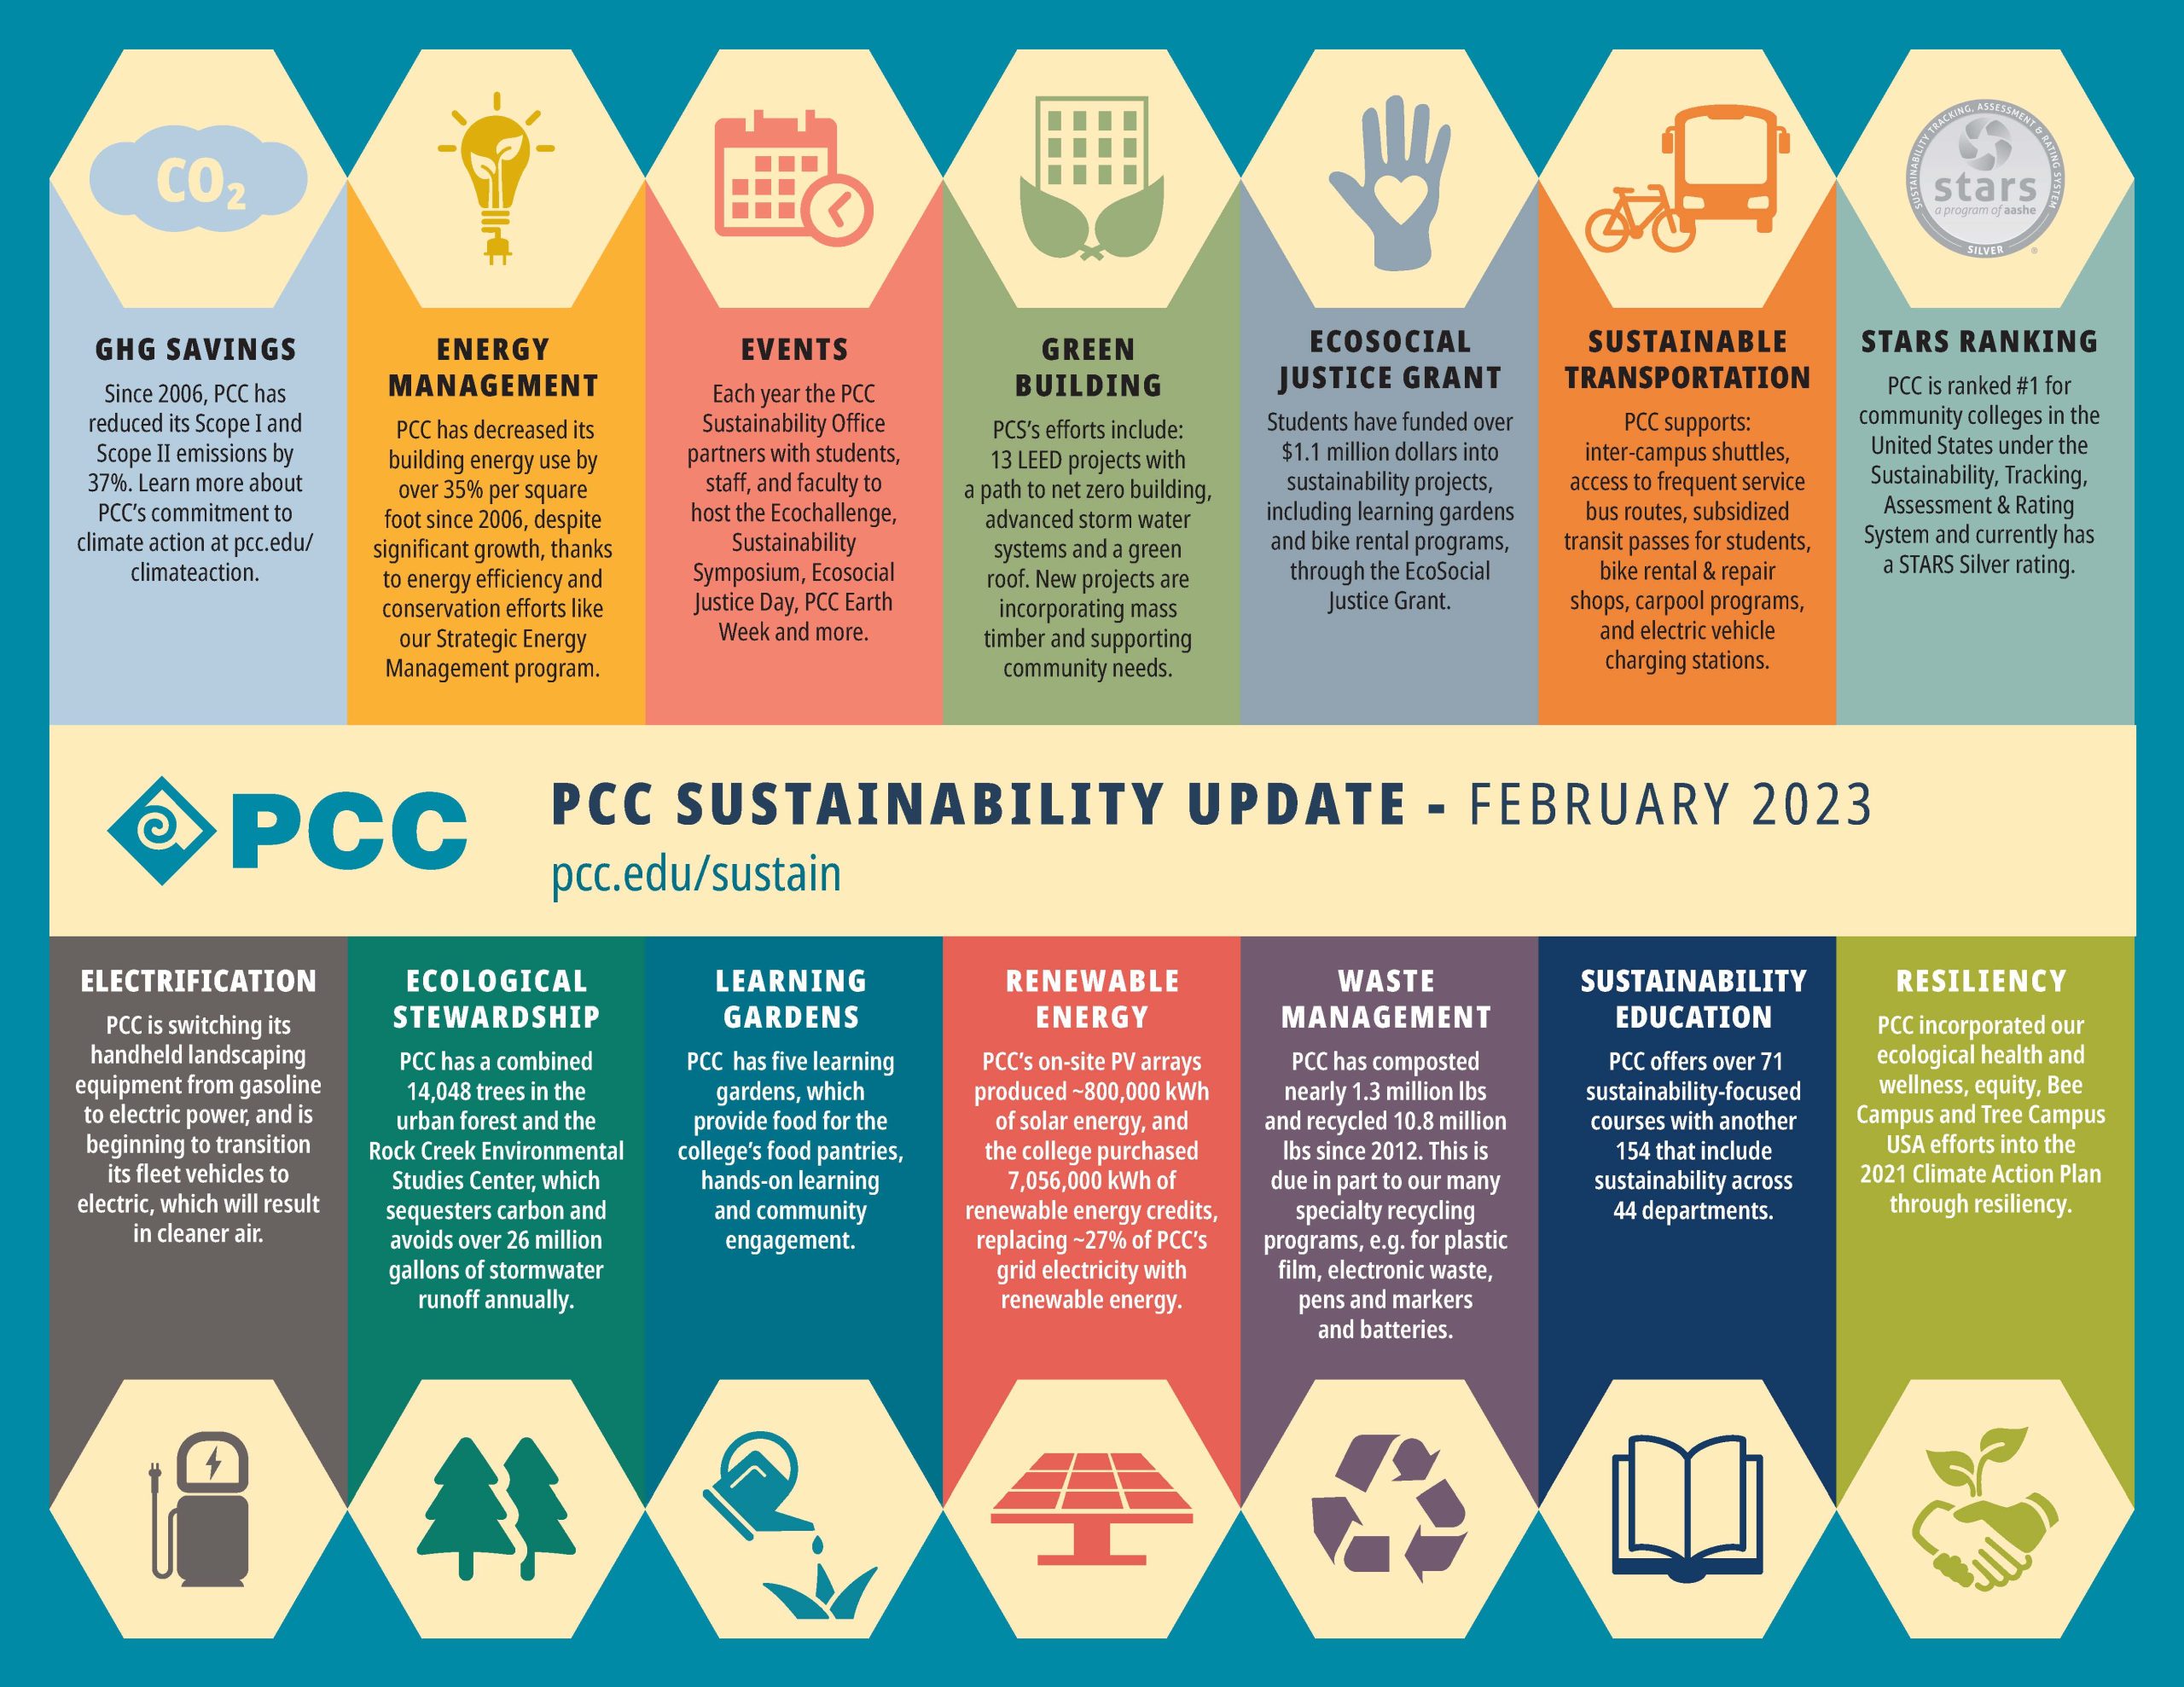 PCC's Sustainability Update - 2023 - download as a pdf using the link below.